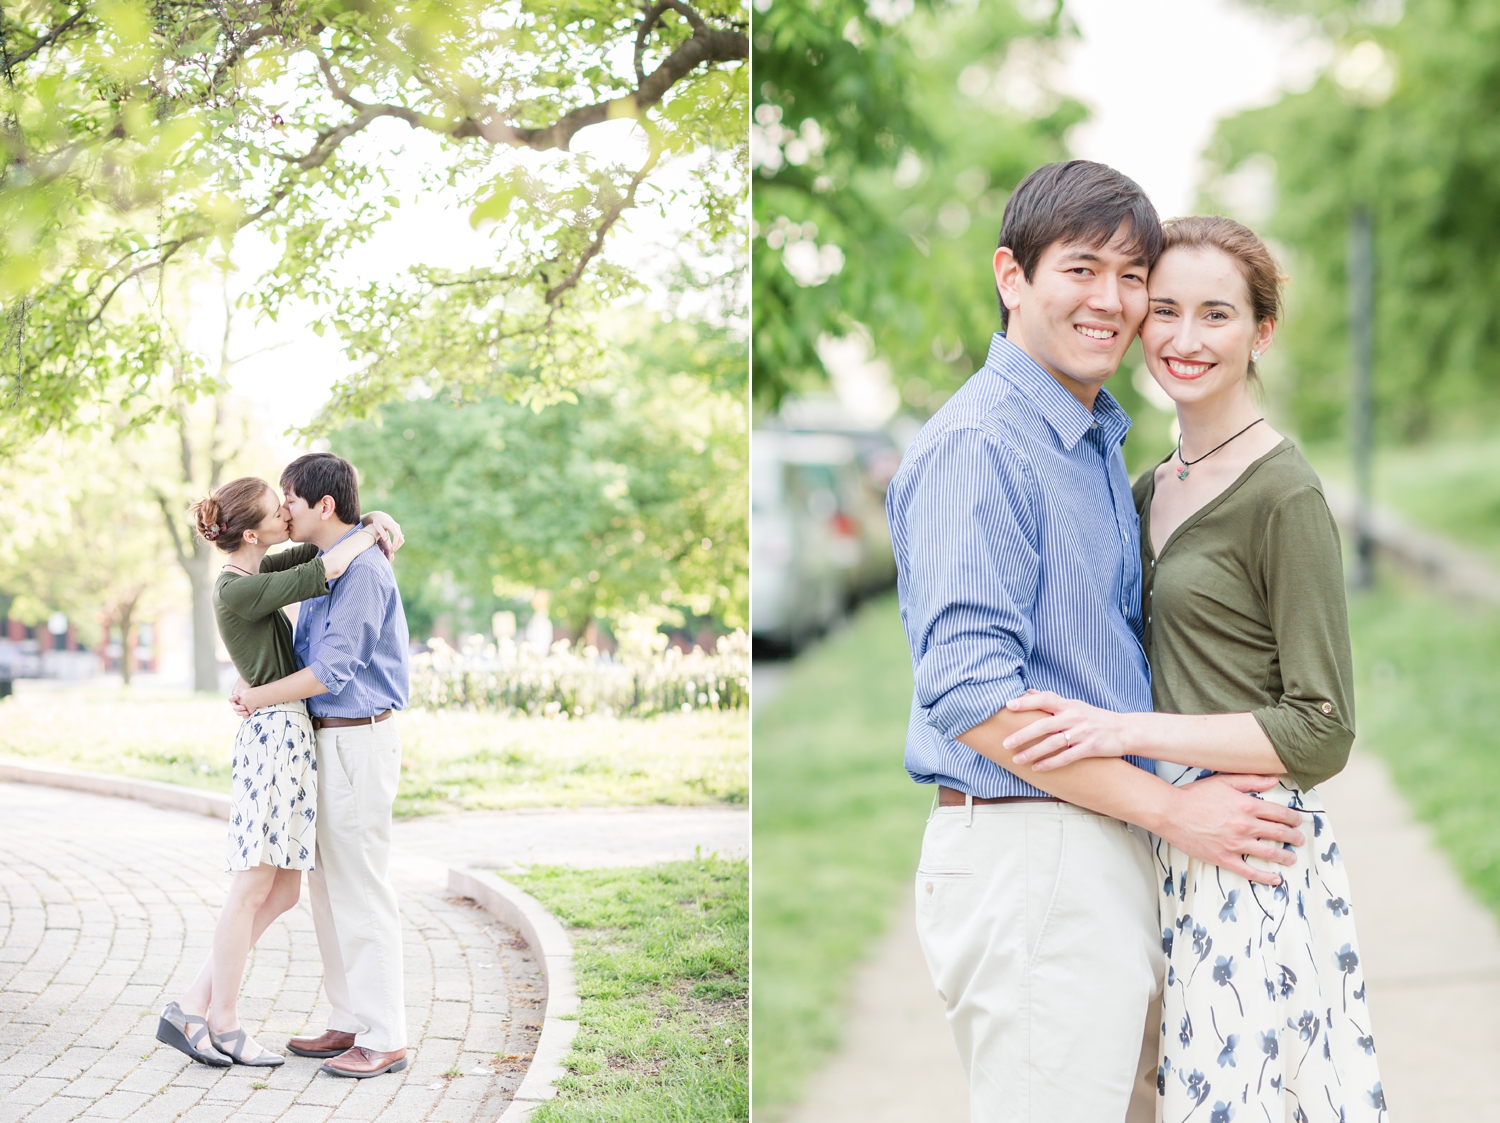  See more from   Brian &amp; Rose’s engagement session at Patterson Park here  ! 